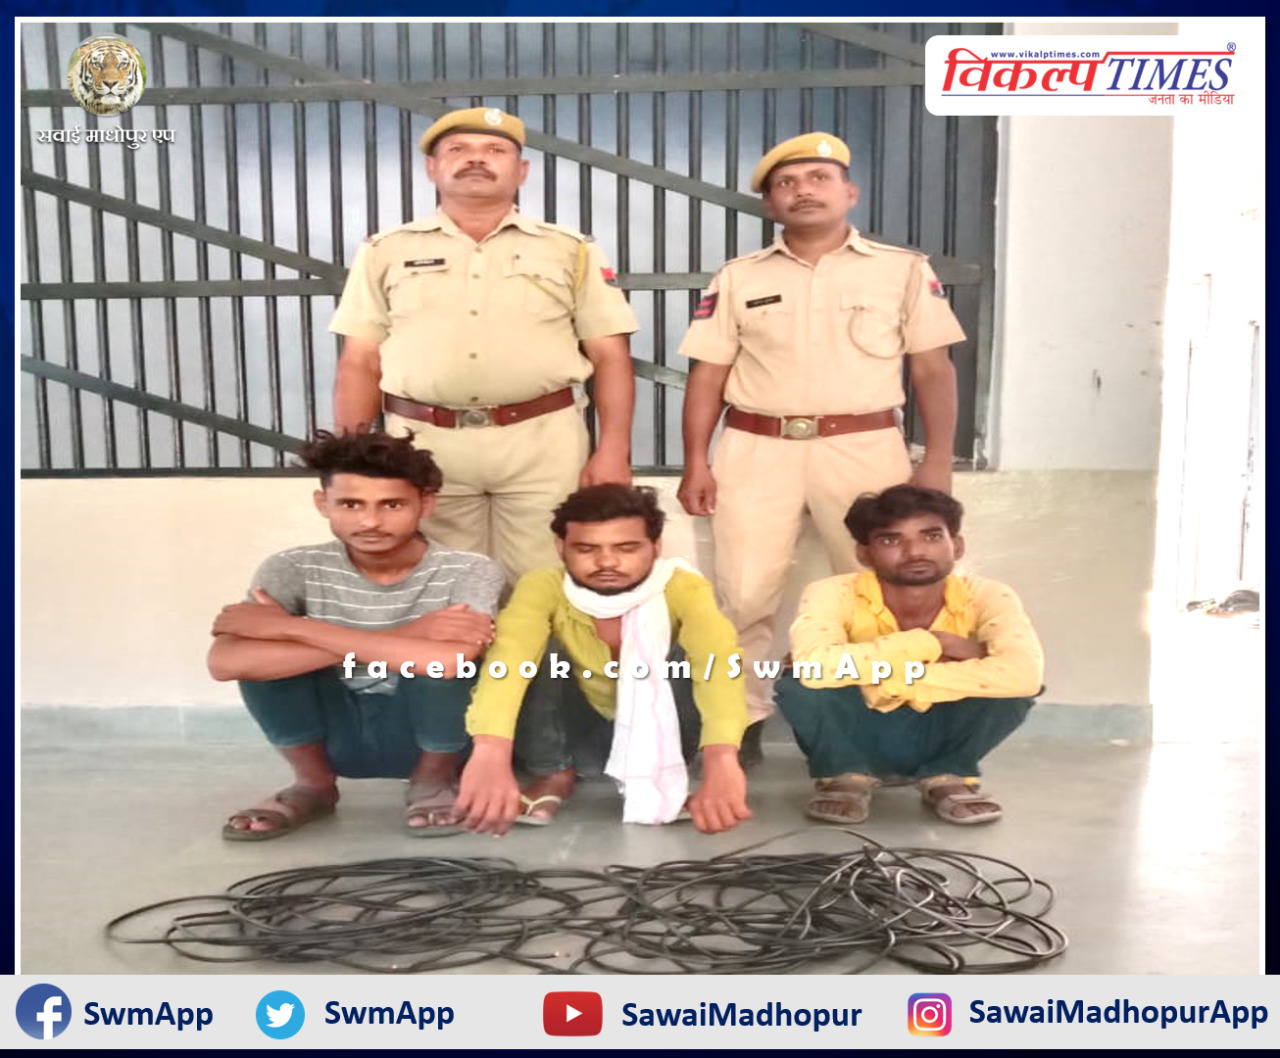 police arrested 3 accused of theft in Ranthambore forest area and stolen goods recovered